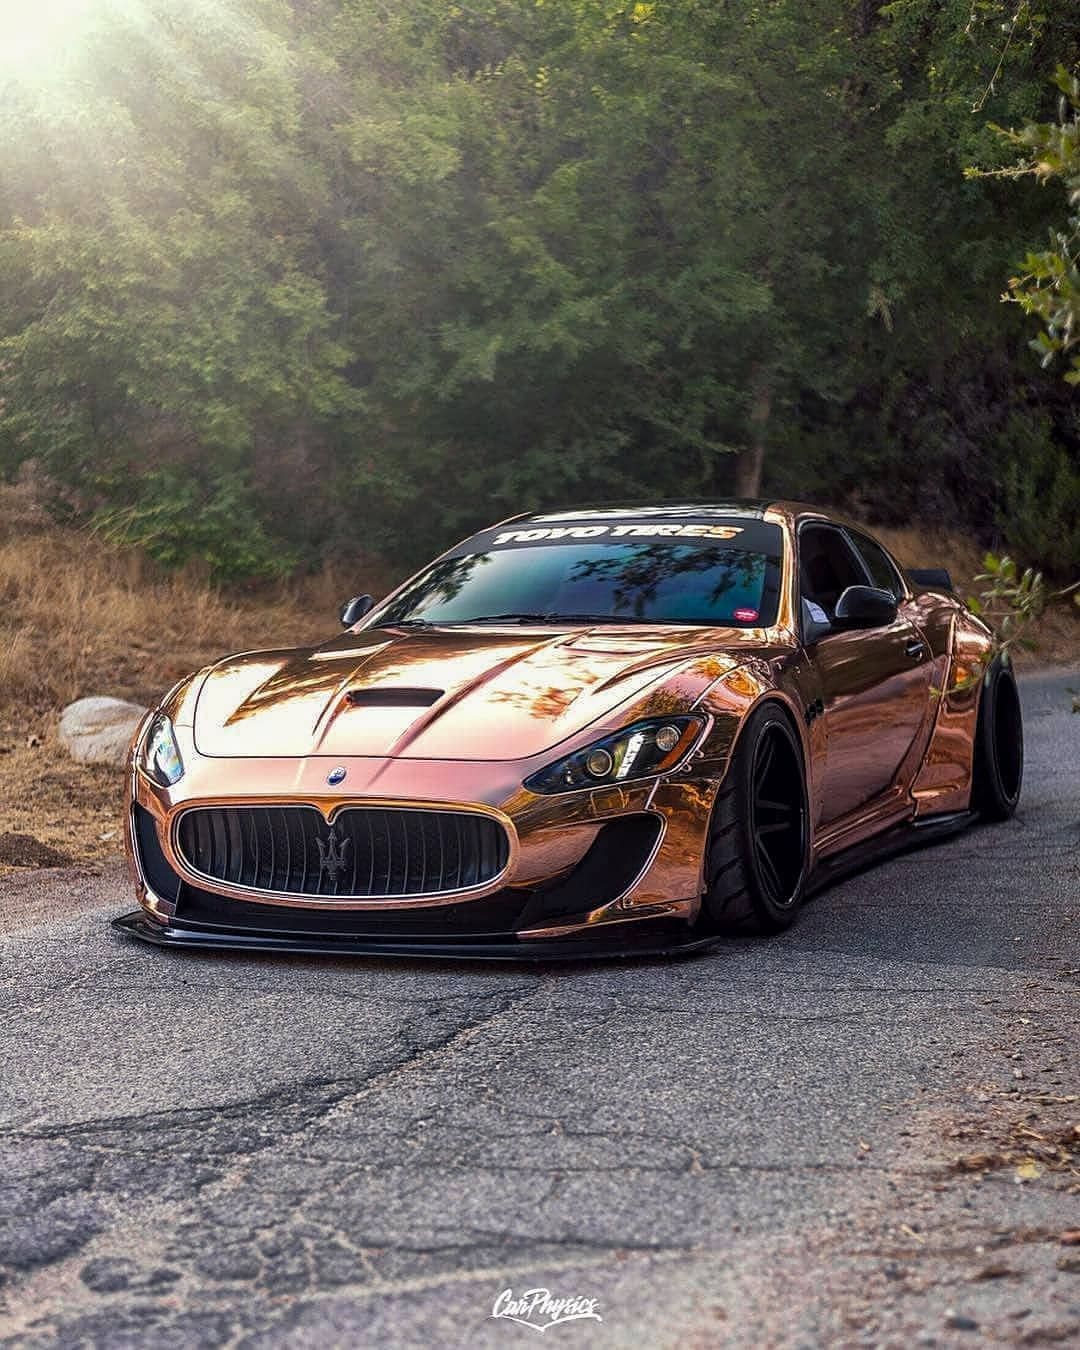 Likes, 17 Comments - on Instagram: “Rose Gold Maserati ❤️ ➖➖➖➖➖➖➖➖➖➖➖